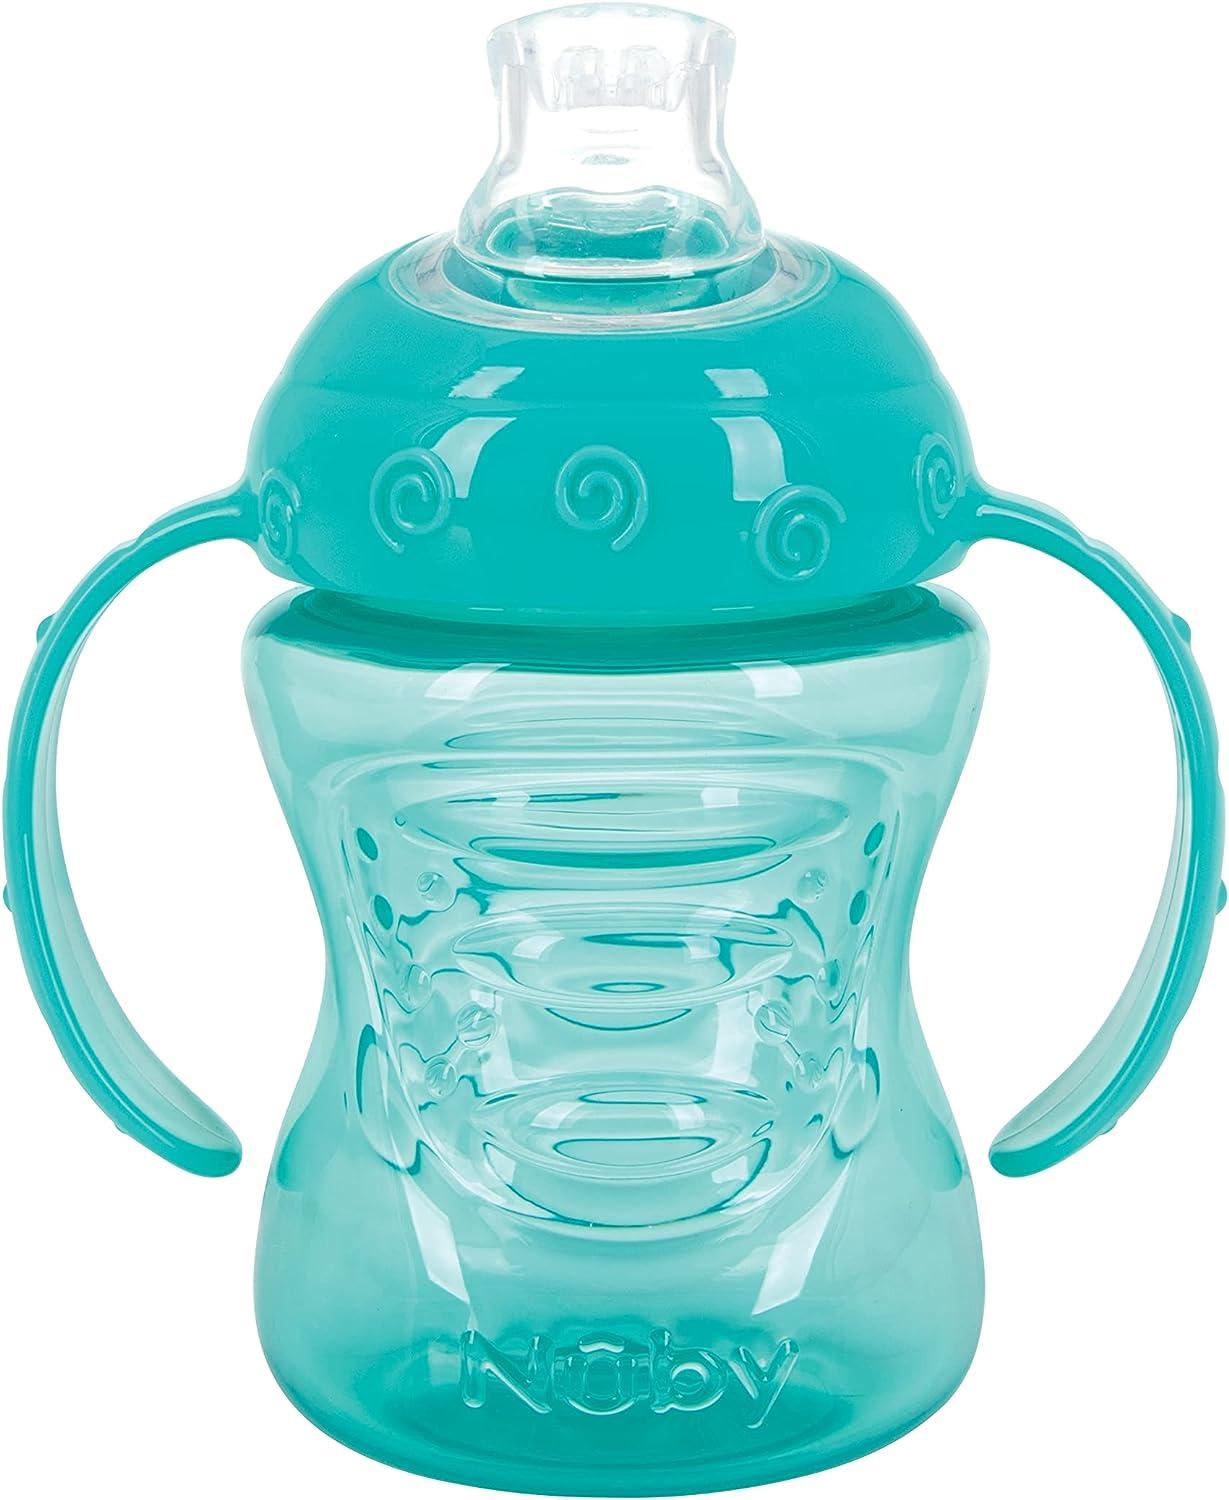 Nuby 2 Count 2 Handle Cup with No Spill Super Spout, Blue/Red